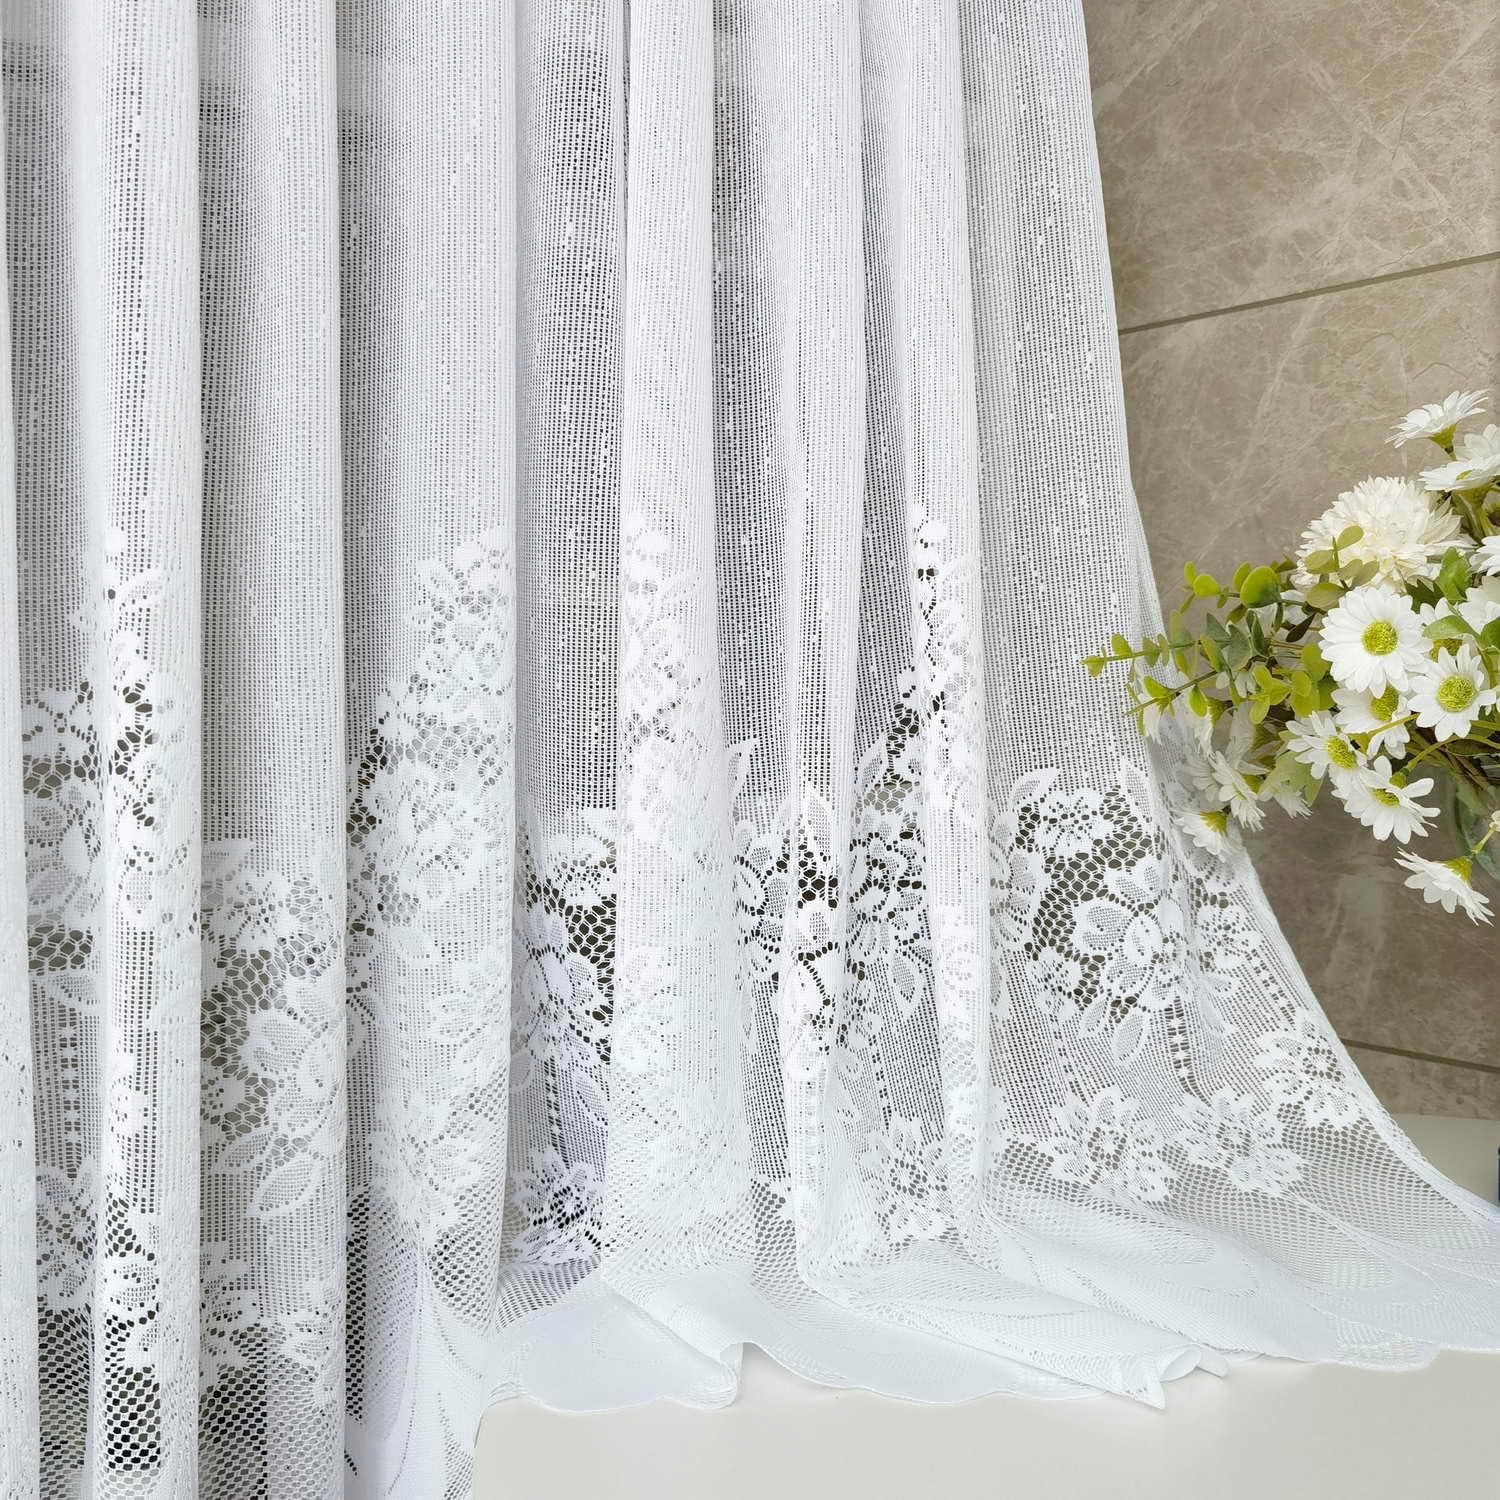 1 Panel Short Lace Curtains Valance for Kitchen Bathroom White Sheer Floral Cafe Curtains 35 Inch Length Scalloped Bottom Curtain Tiers Tulle Voile Window Treatment Rod Pocket Top W39 X L35 Inches